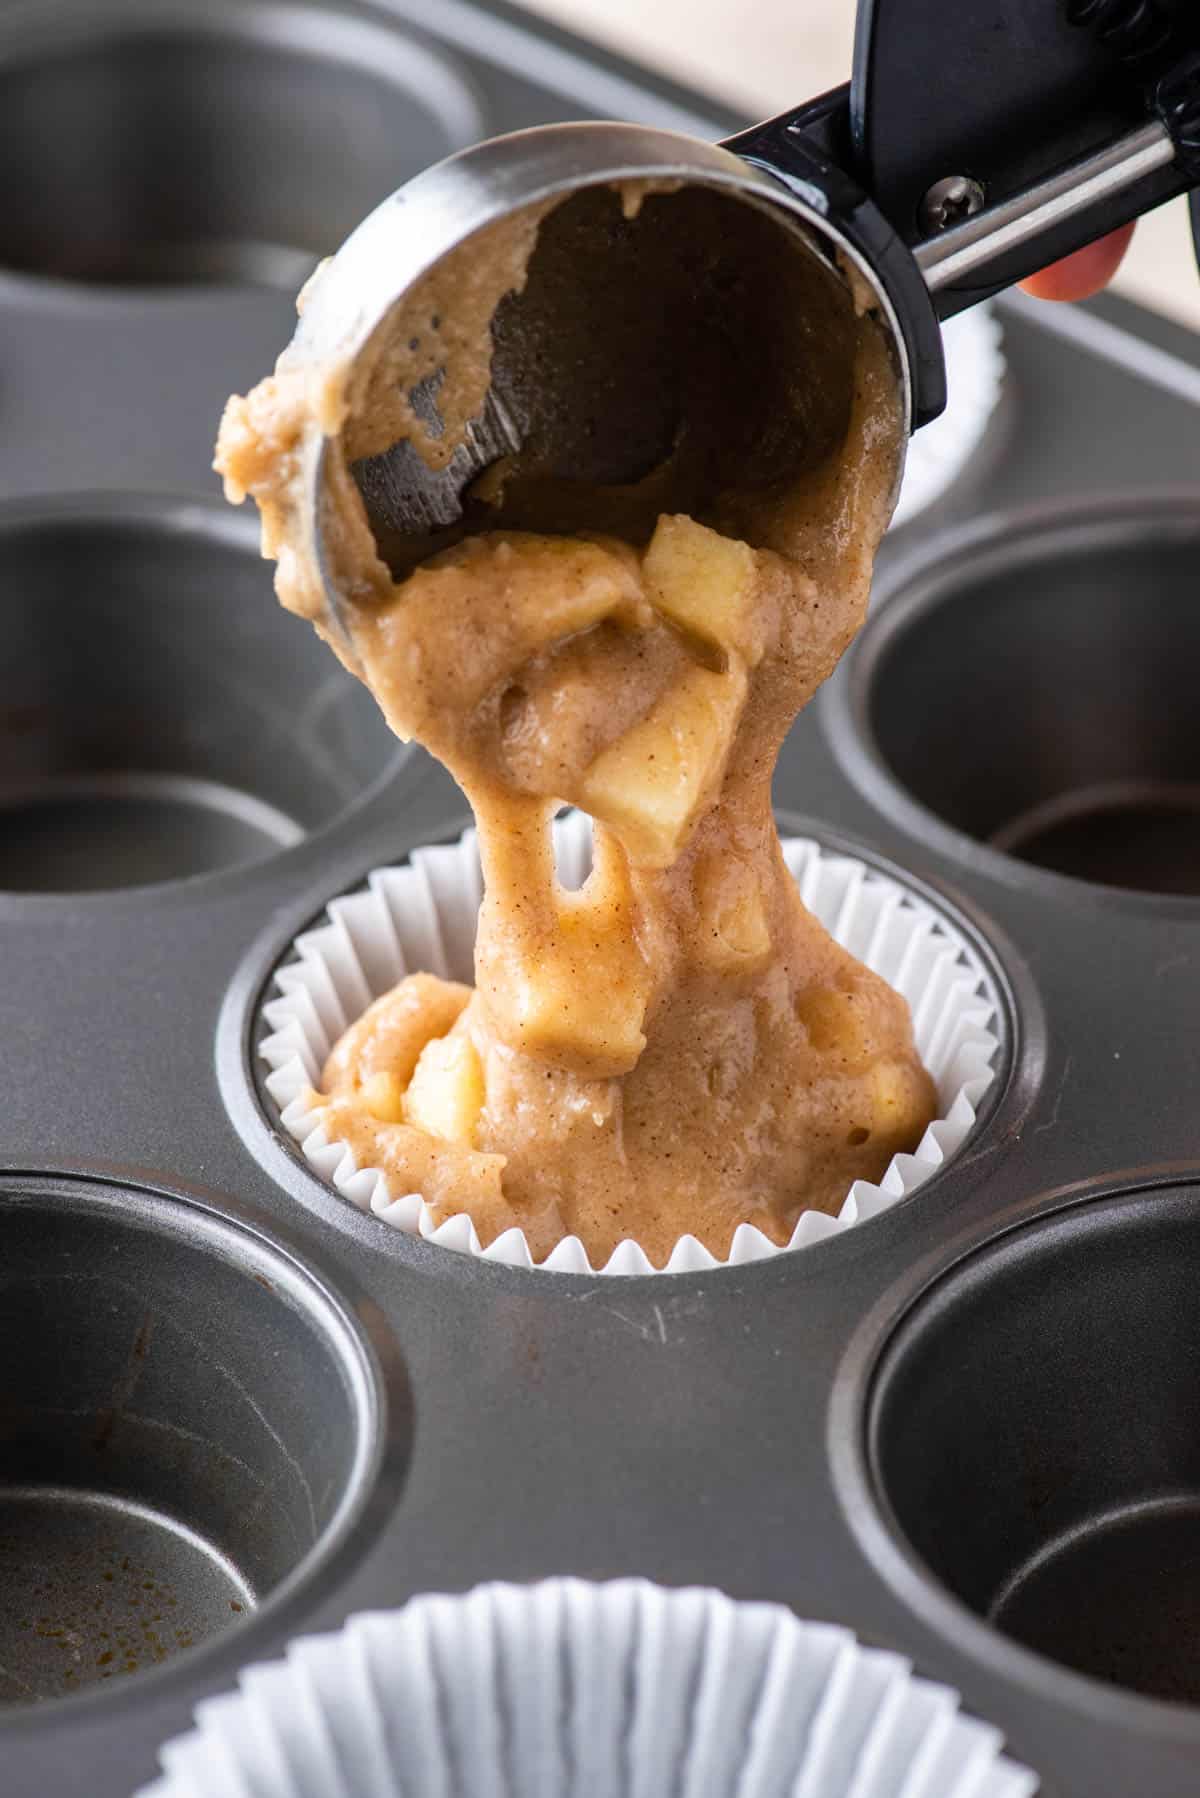 apple cinnamon muffins batter being scooped into a muffin liner inside a muffin pan